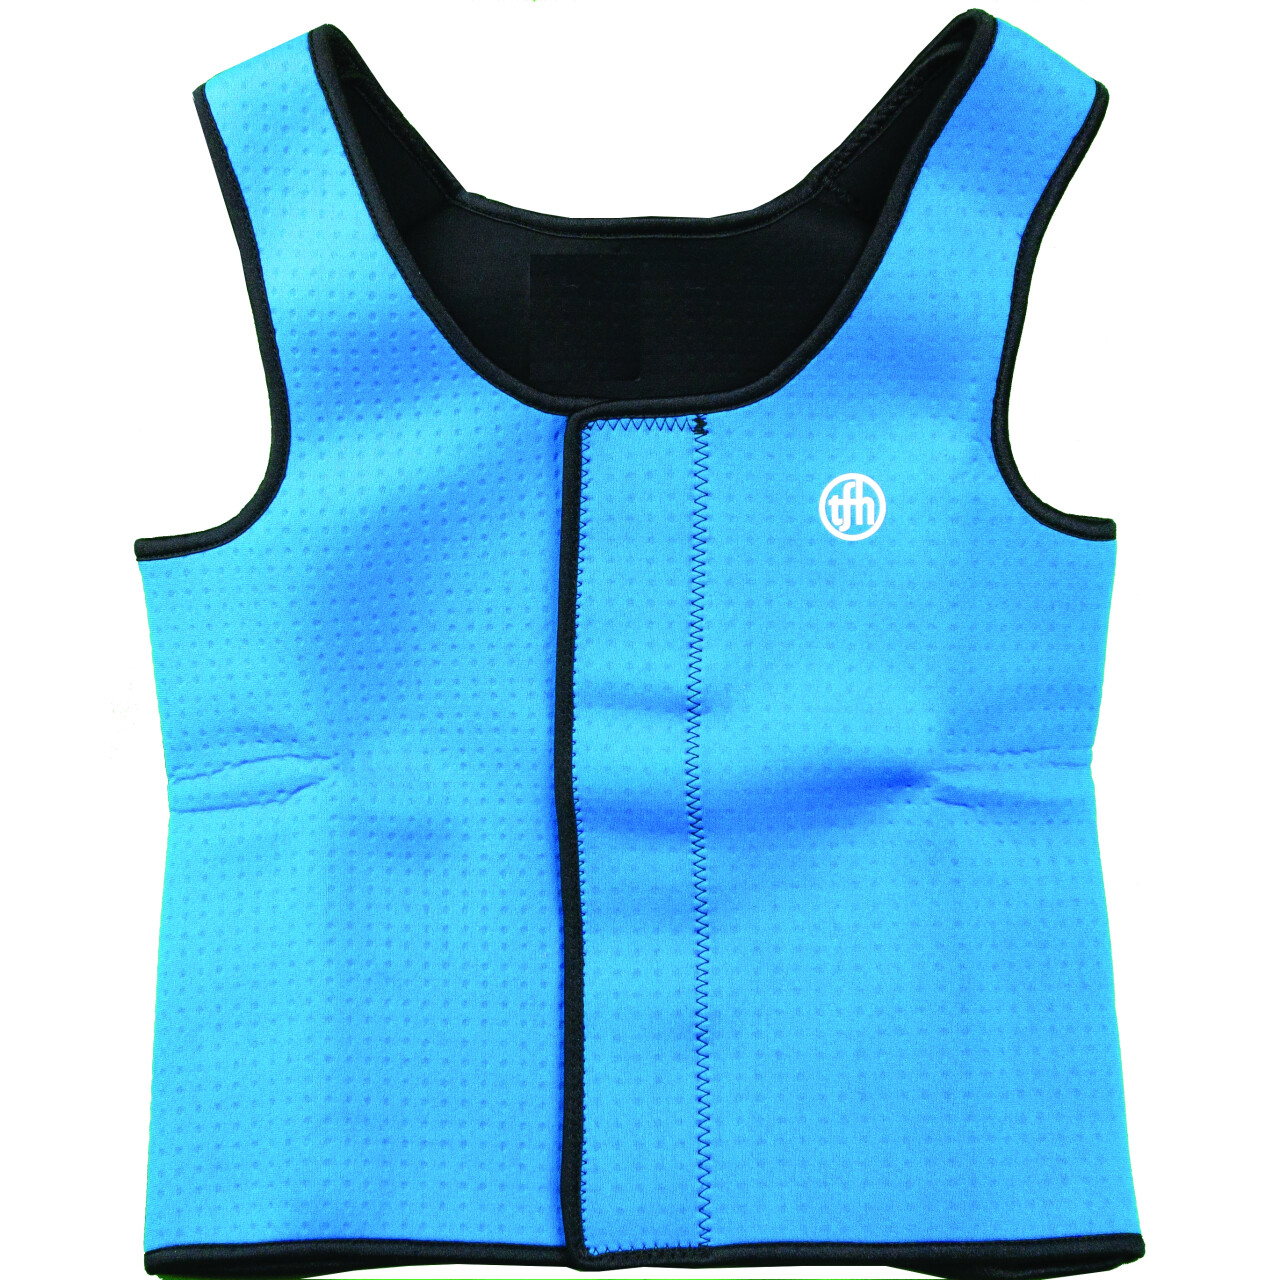 Pressure Vest- Soothing Deep Pressure for Kids and Adults with Autism